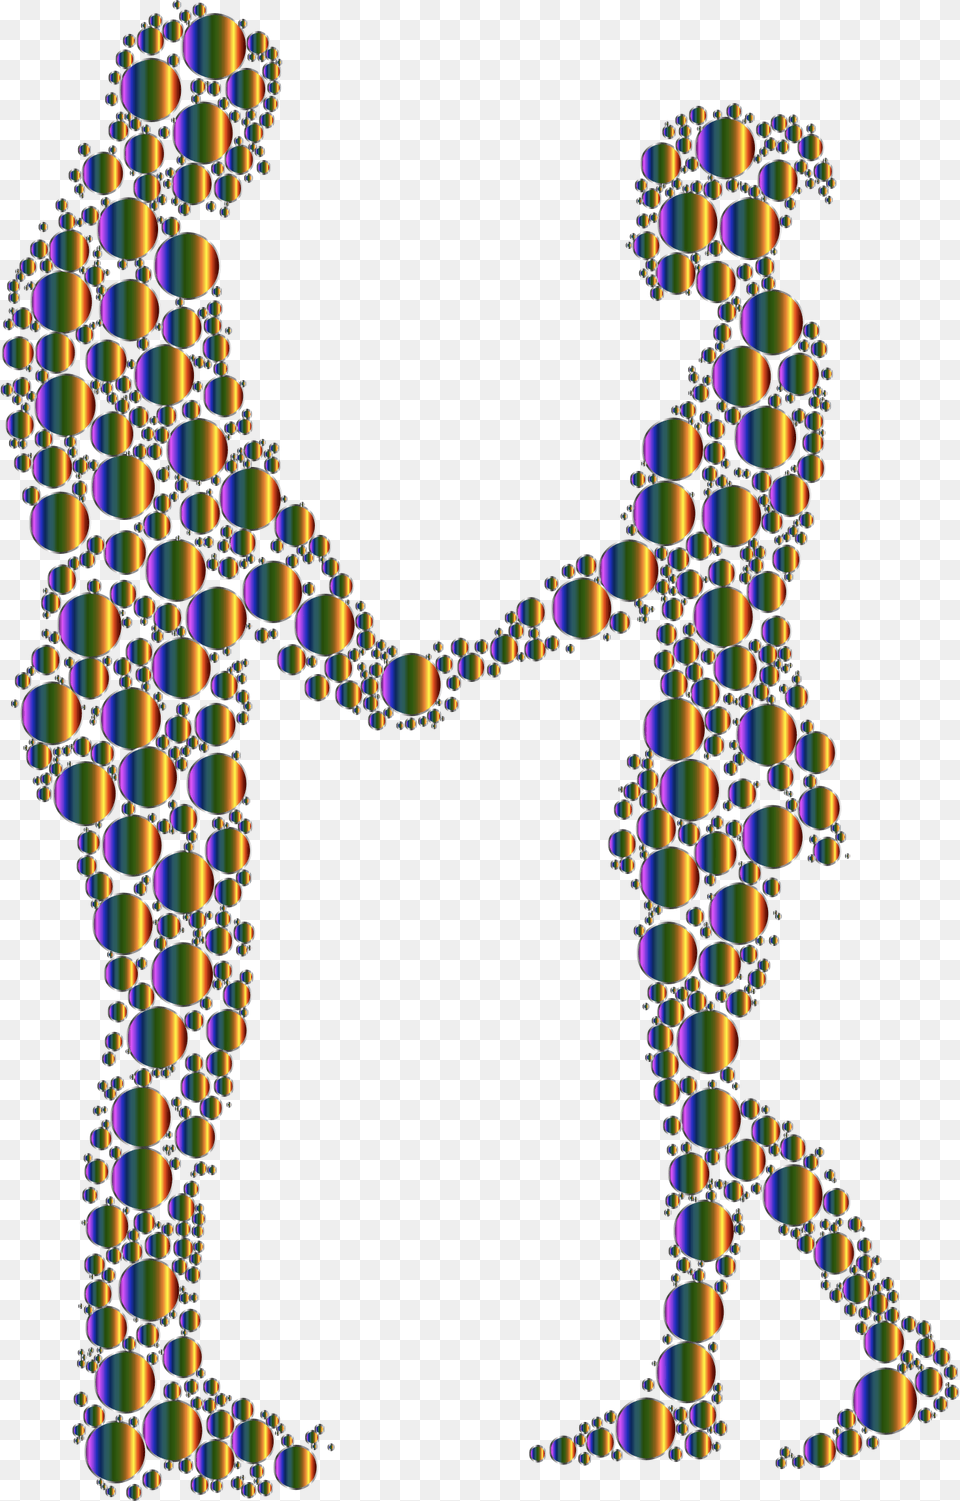 Silhouette Couple Holding Hands Clipart Download Couple Silhouette Holding Hands, Accessories, Jewelry, Necklace, Art Free Png